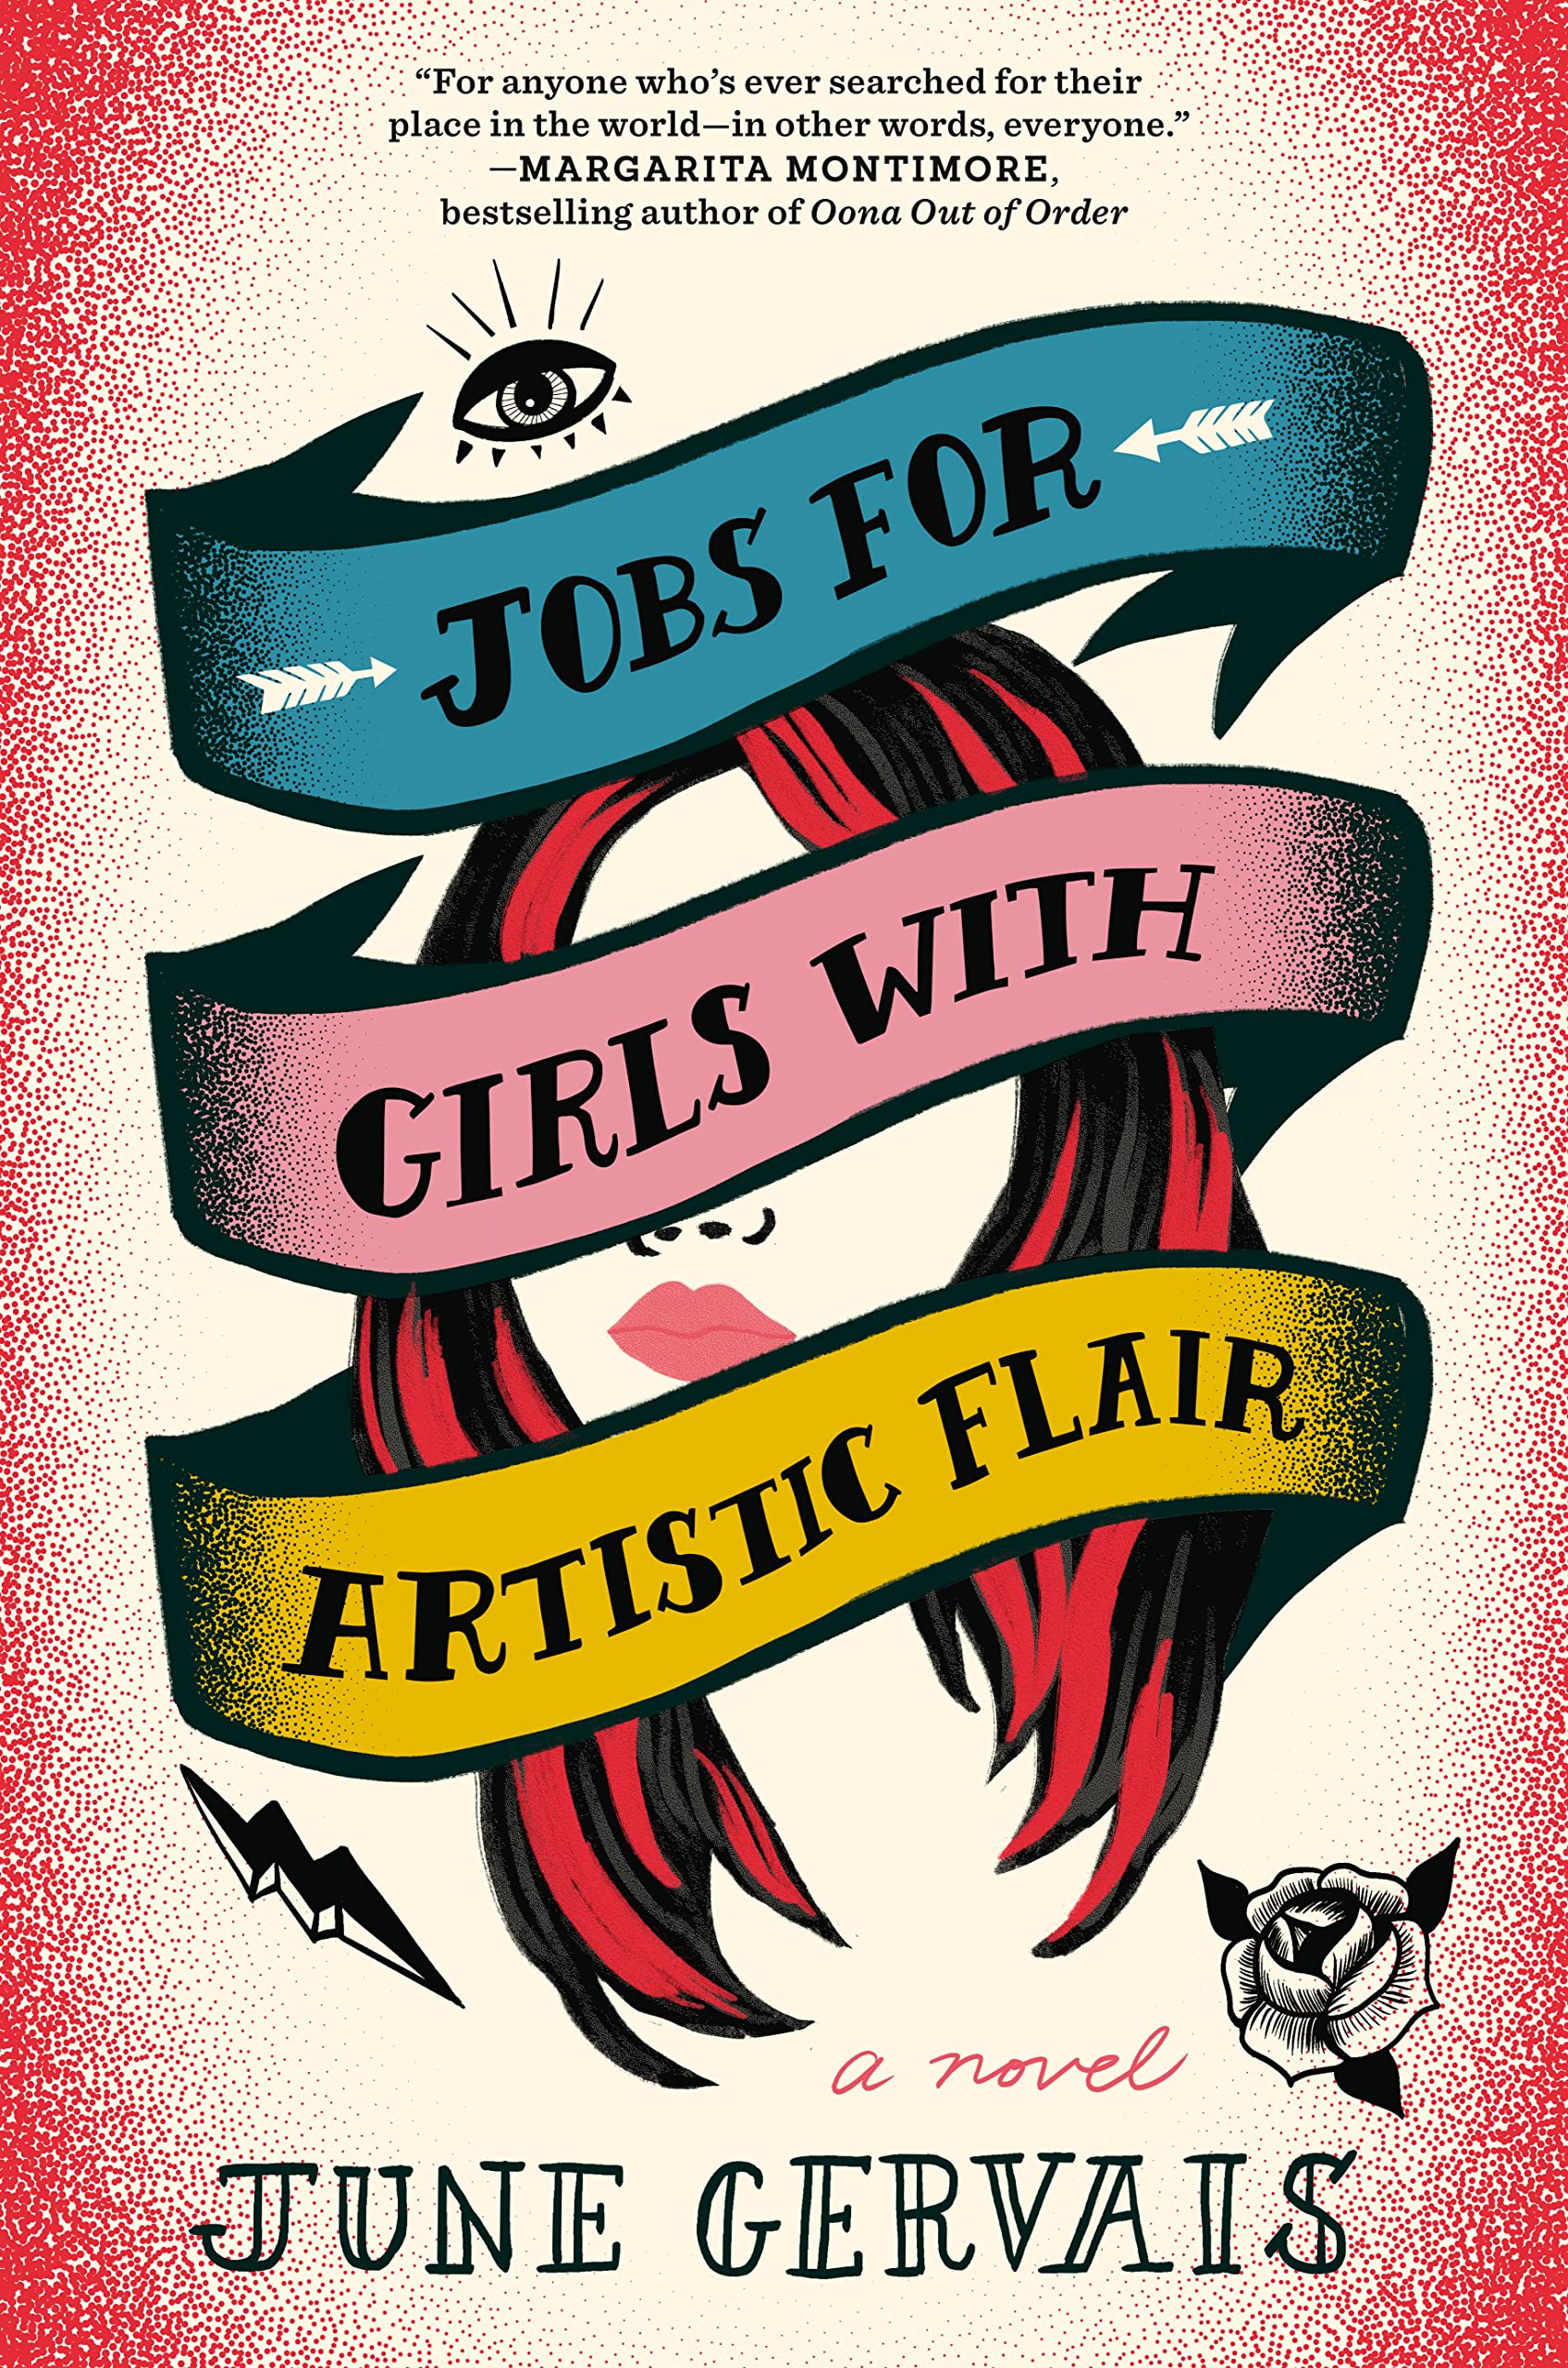 cover of June Gervais's jobs for girls with artistic flair